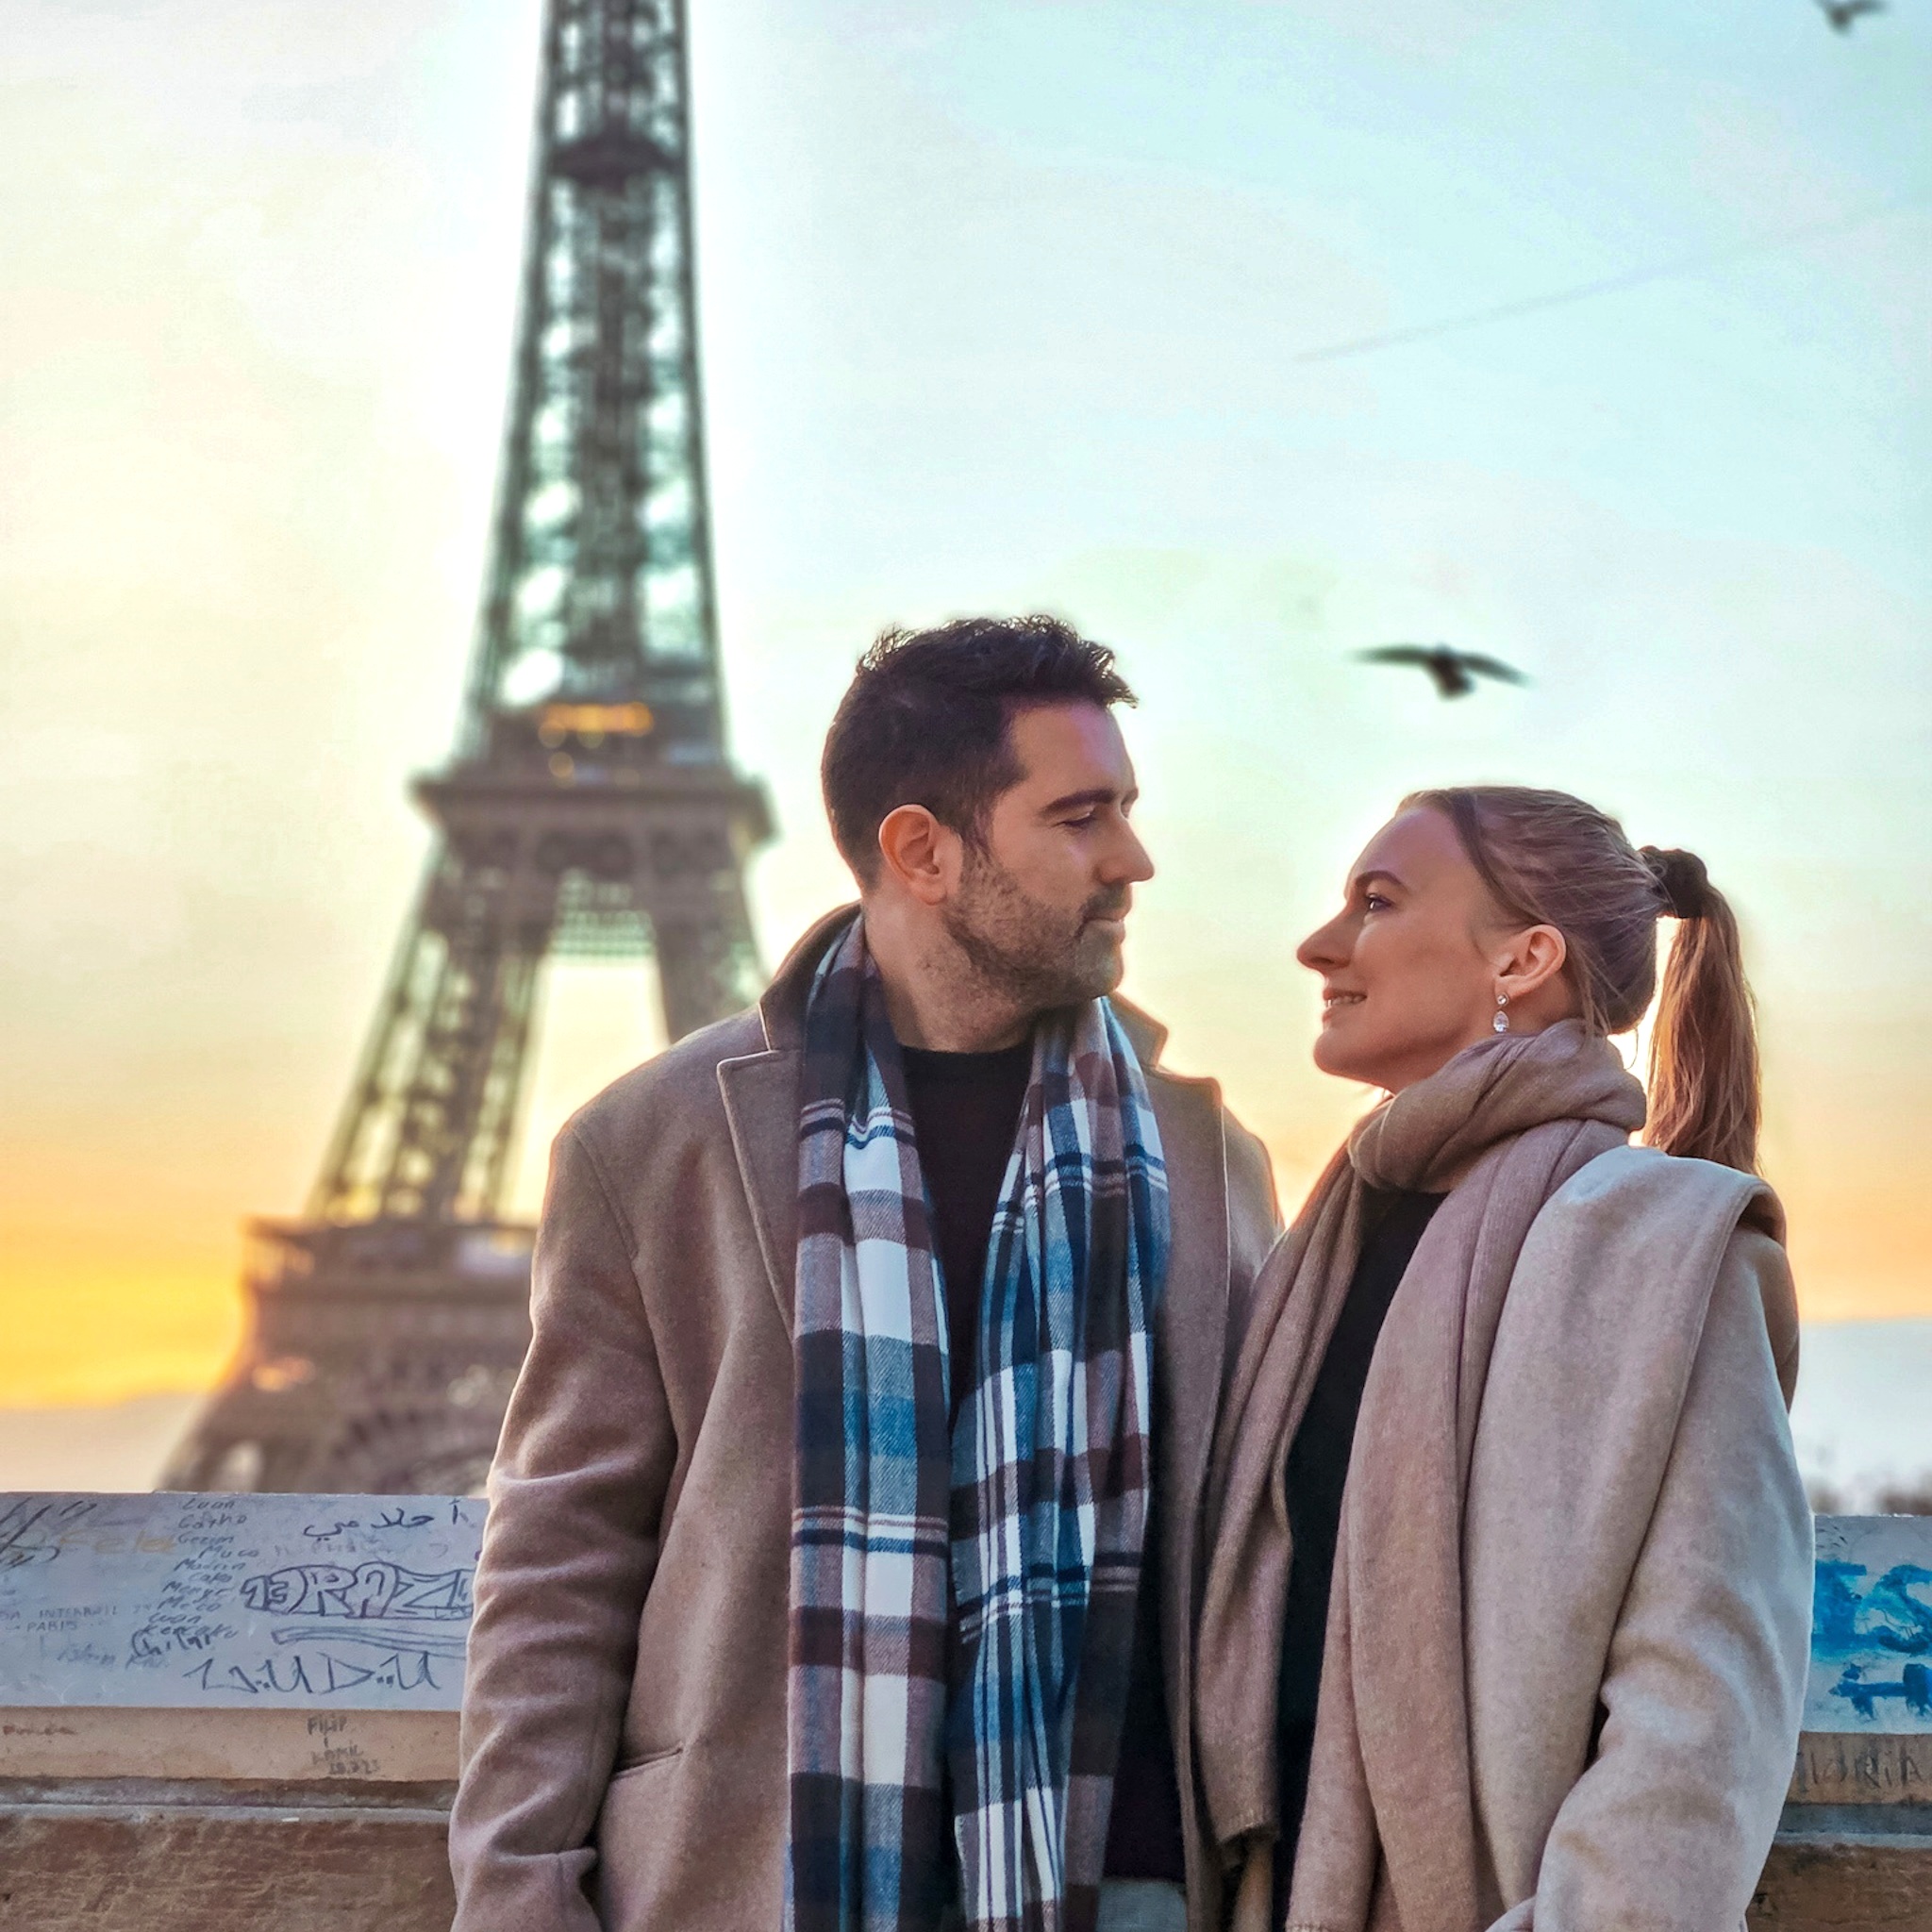 Romantic Photo Spots with Eiffel Tower in Paris - Travel Couple posing with Eiffel Tower at Trocadero stairs